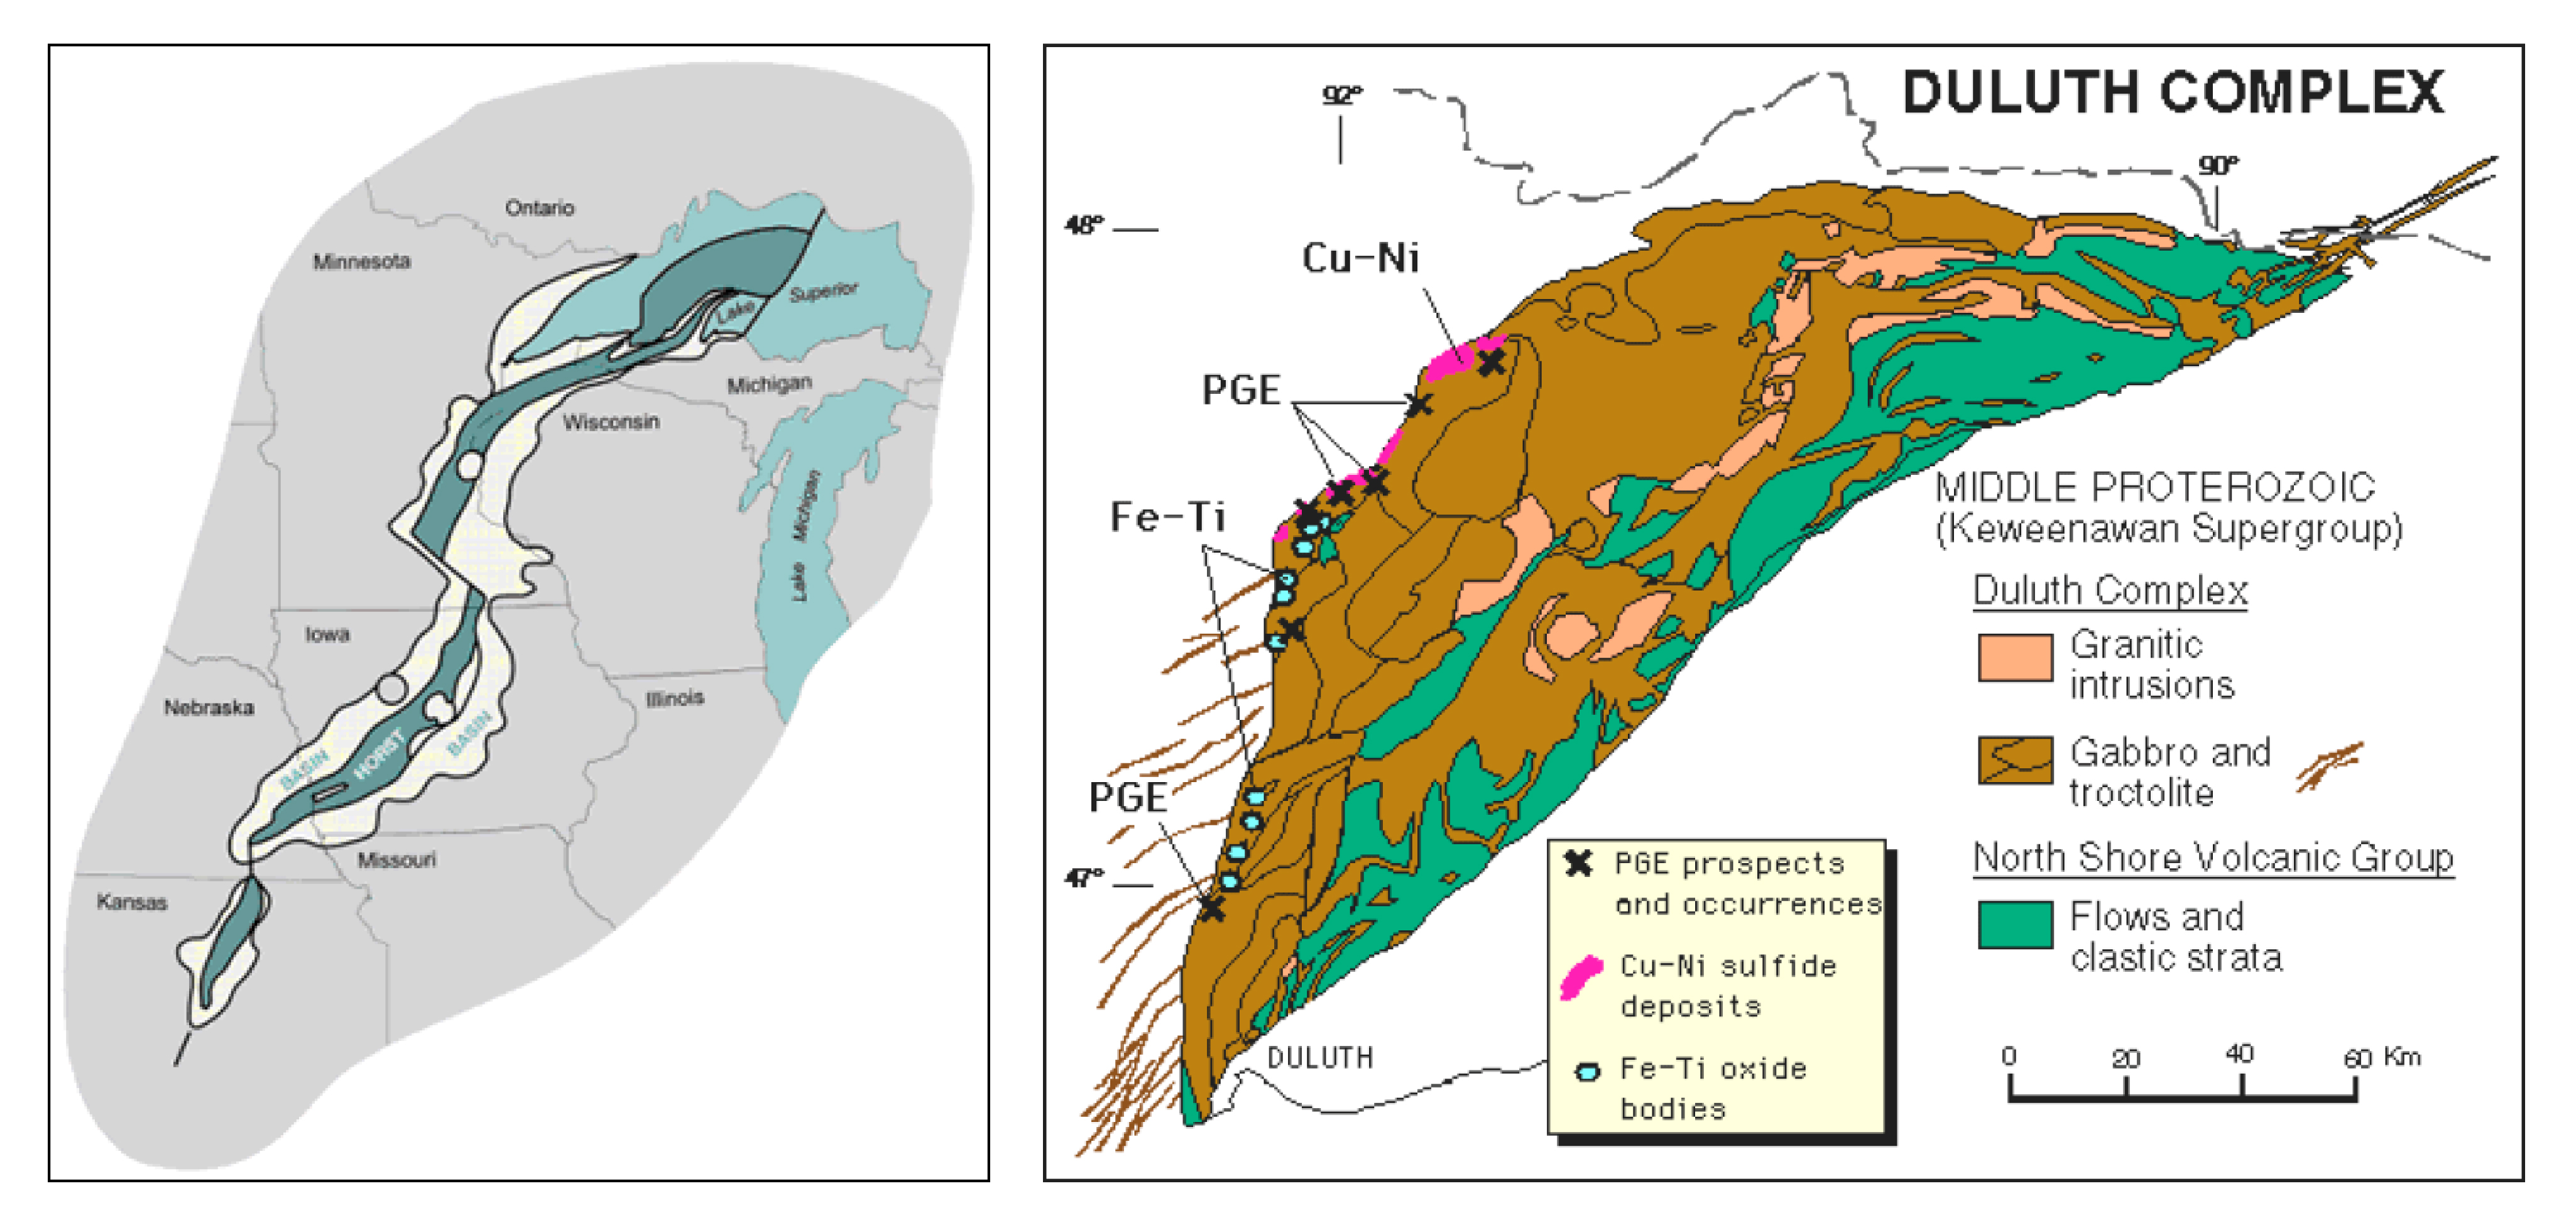 Left: The Midcontinent rift, sedimentary rocks show in yellow (Iowa Geological Survey); Right: The Duluth Complex, mafic rocks shown in brown (Minnesota Geological Survey).